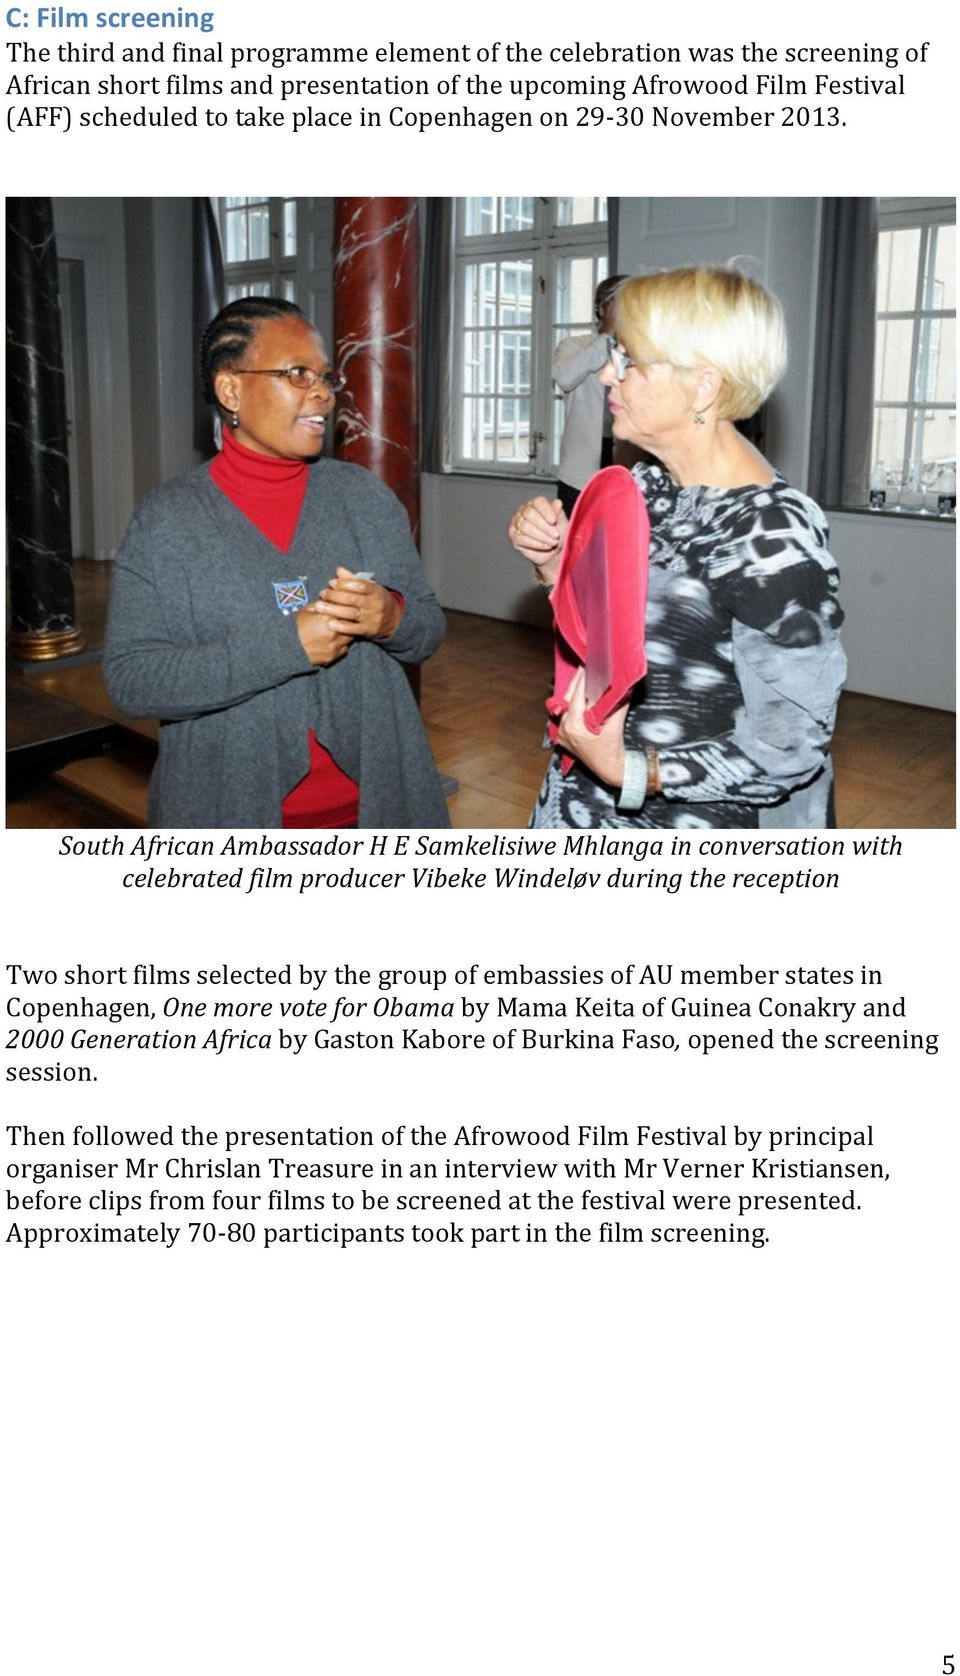 South African Ambassador H E Samkelisiwe Mhlanga in conversation with celebrated film producer Vibeke Windeløv during the reception Two short films selected by the group of embassies of AU member